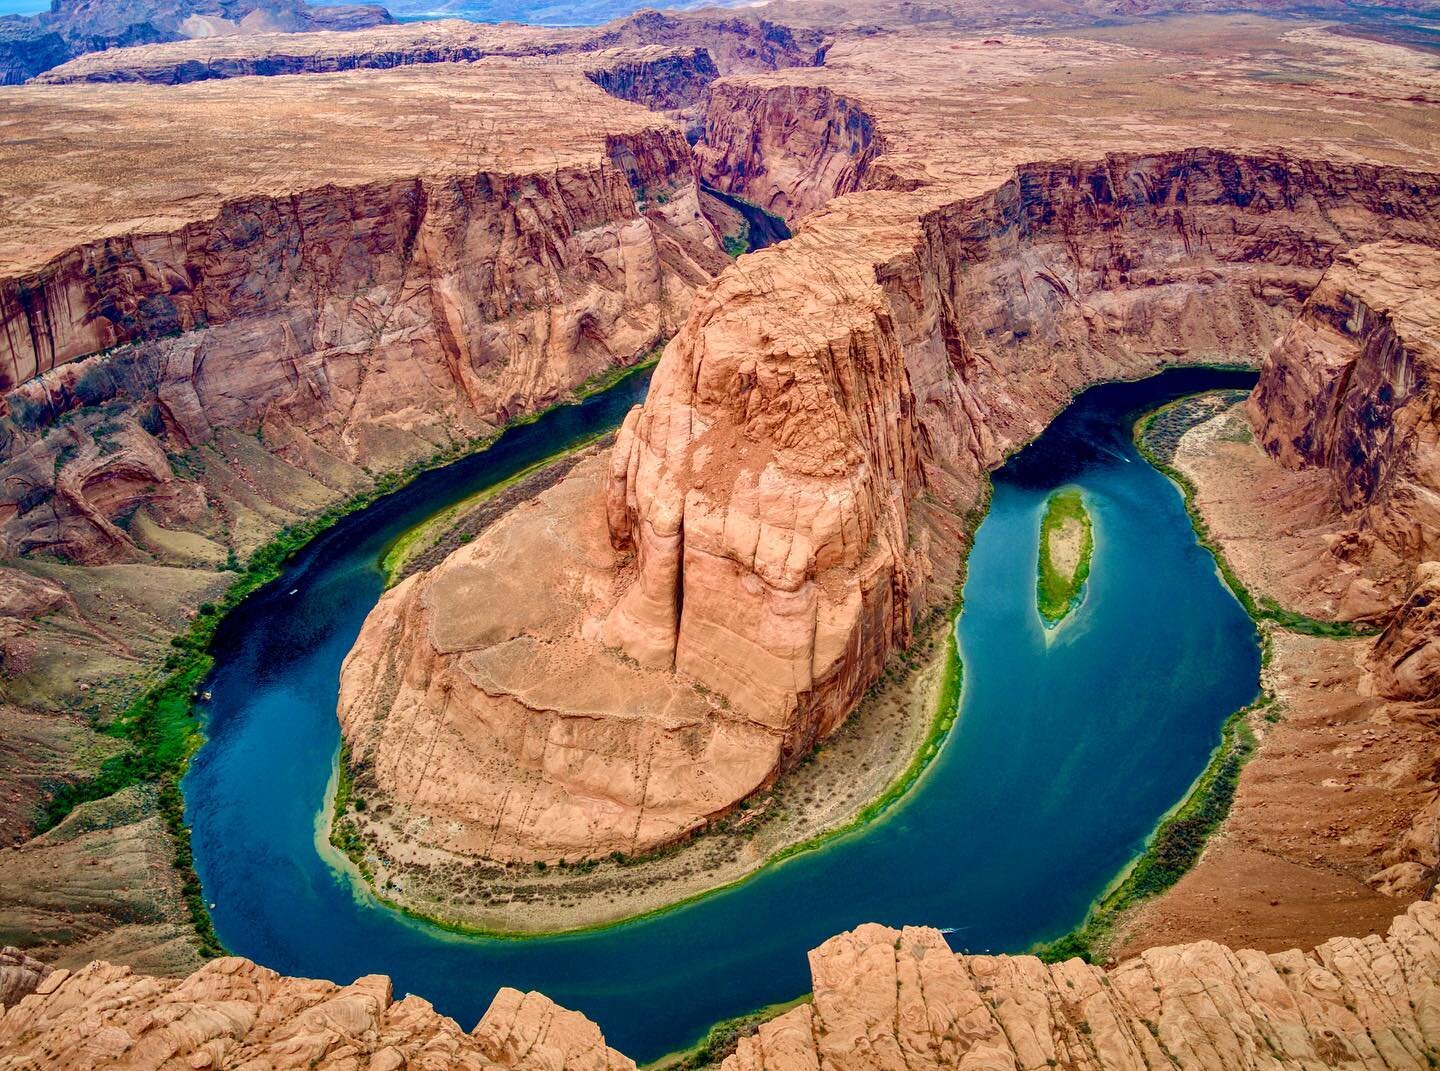 Horseshoe Bend is a meander of the Colorado River in a horseshoe-shape located in the United States, near the town of Page, Arizona. Horseshoe Bend is at a distance of 5 miles (8.0 km) downstream from the Lake Powell and Glen Canyon Dam within Glen C